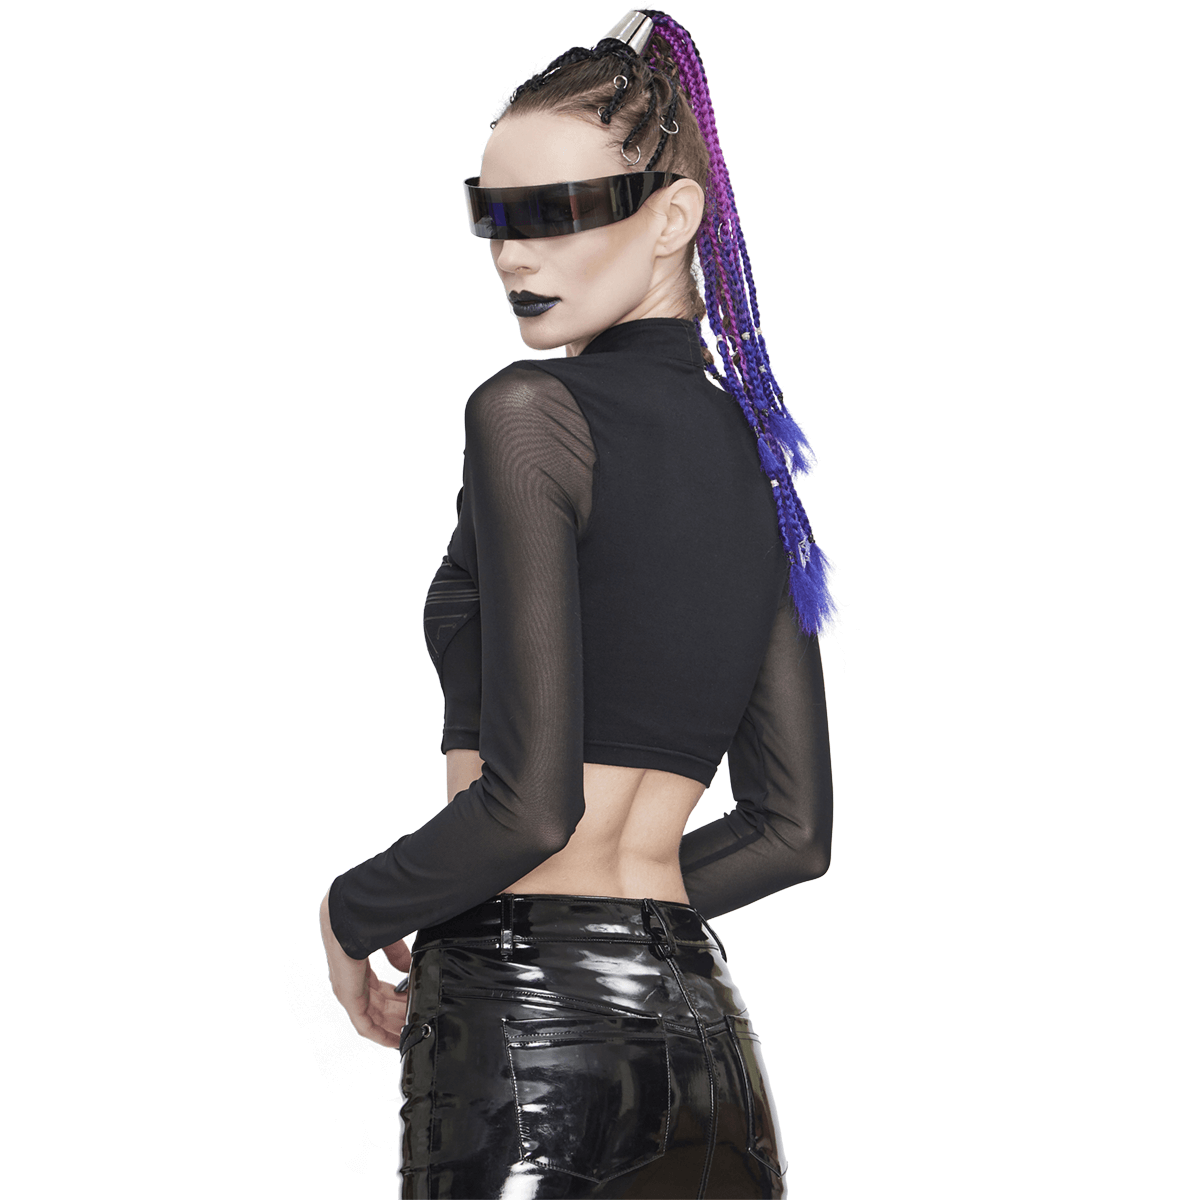 Cyberpunk Women's Sheer Black Crop Top / High Neck Collar Lace Tops With Buckle Straps on Shoulders - HARD'N'HEAVY